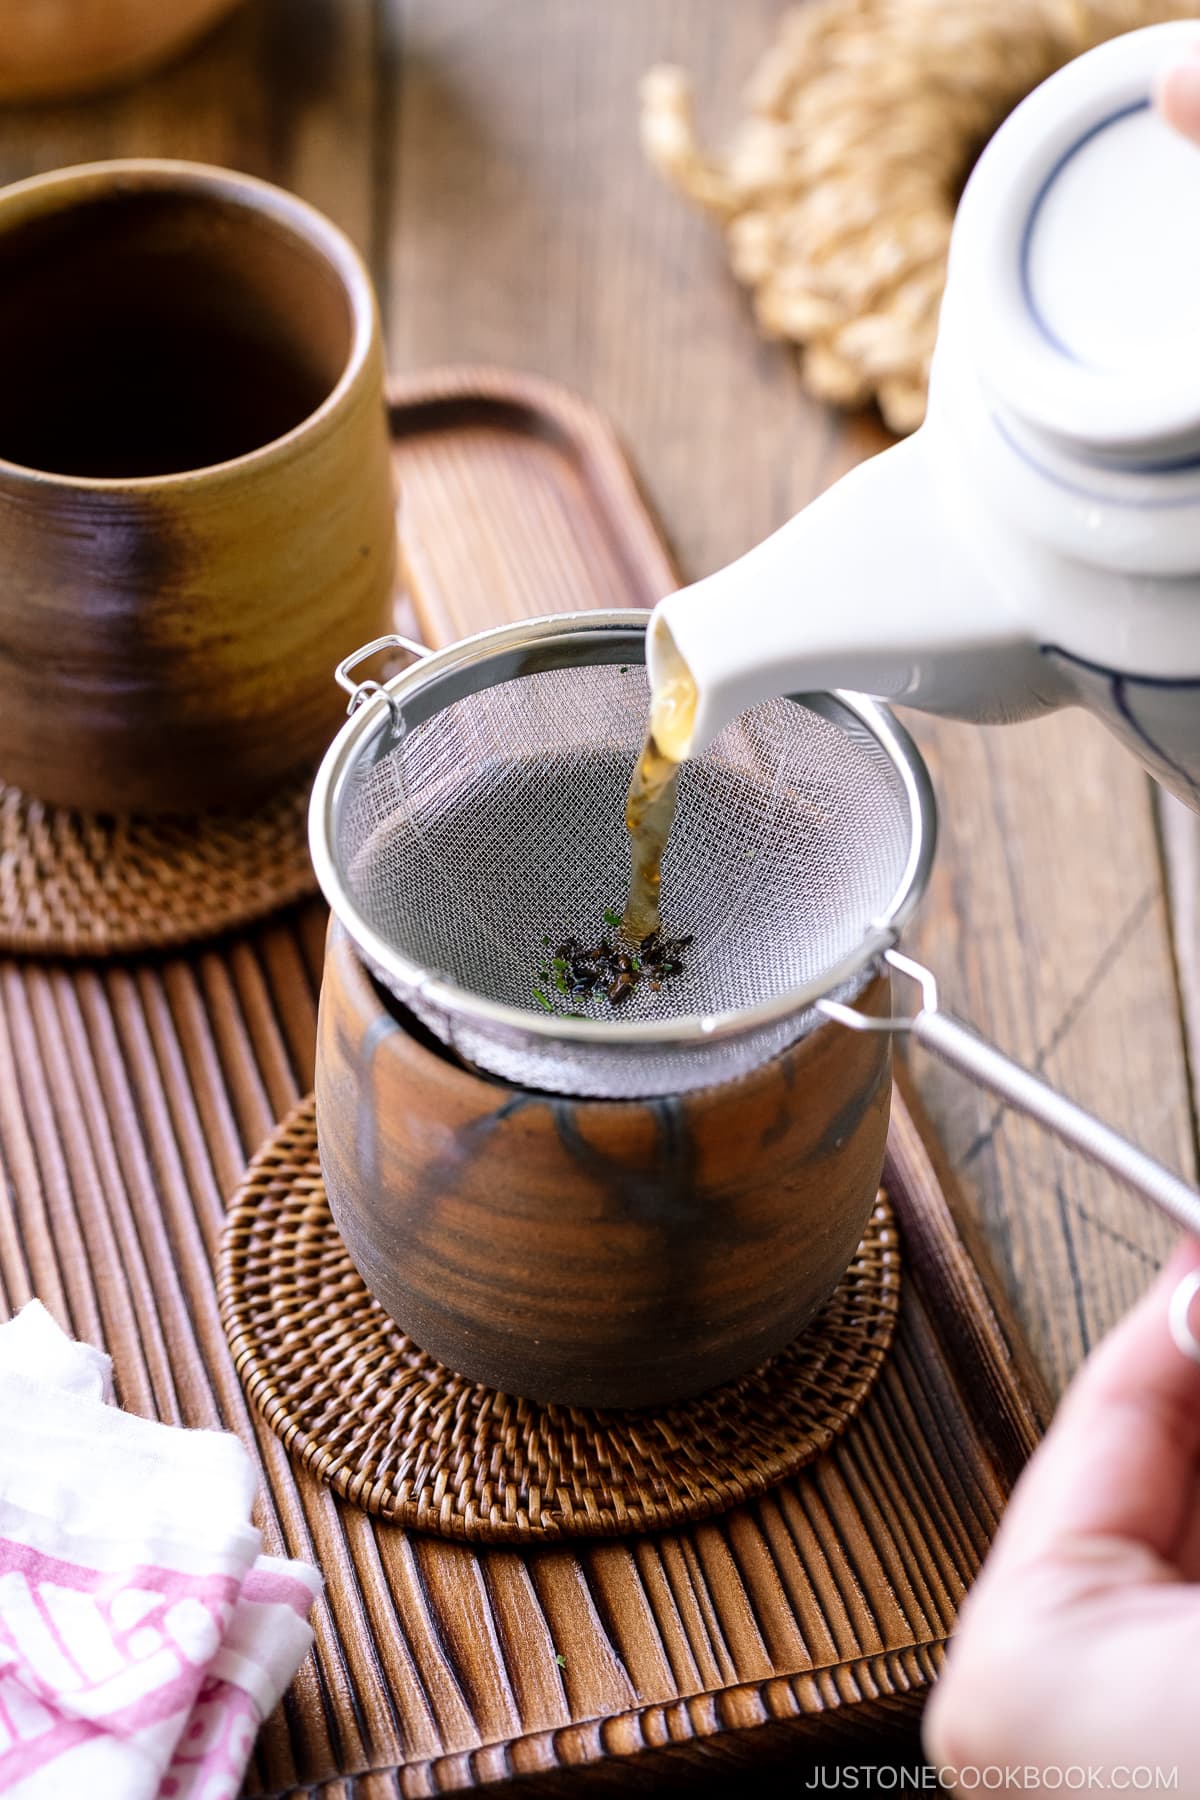 hojicha being poured into a ceramic teacup